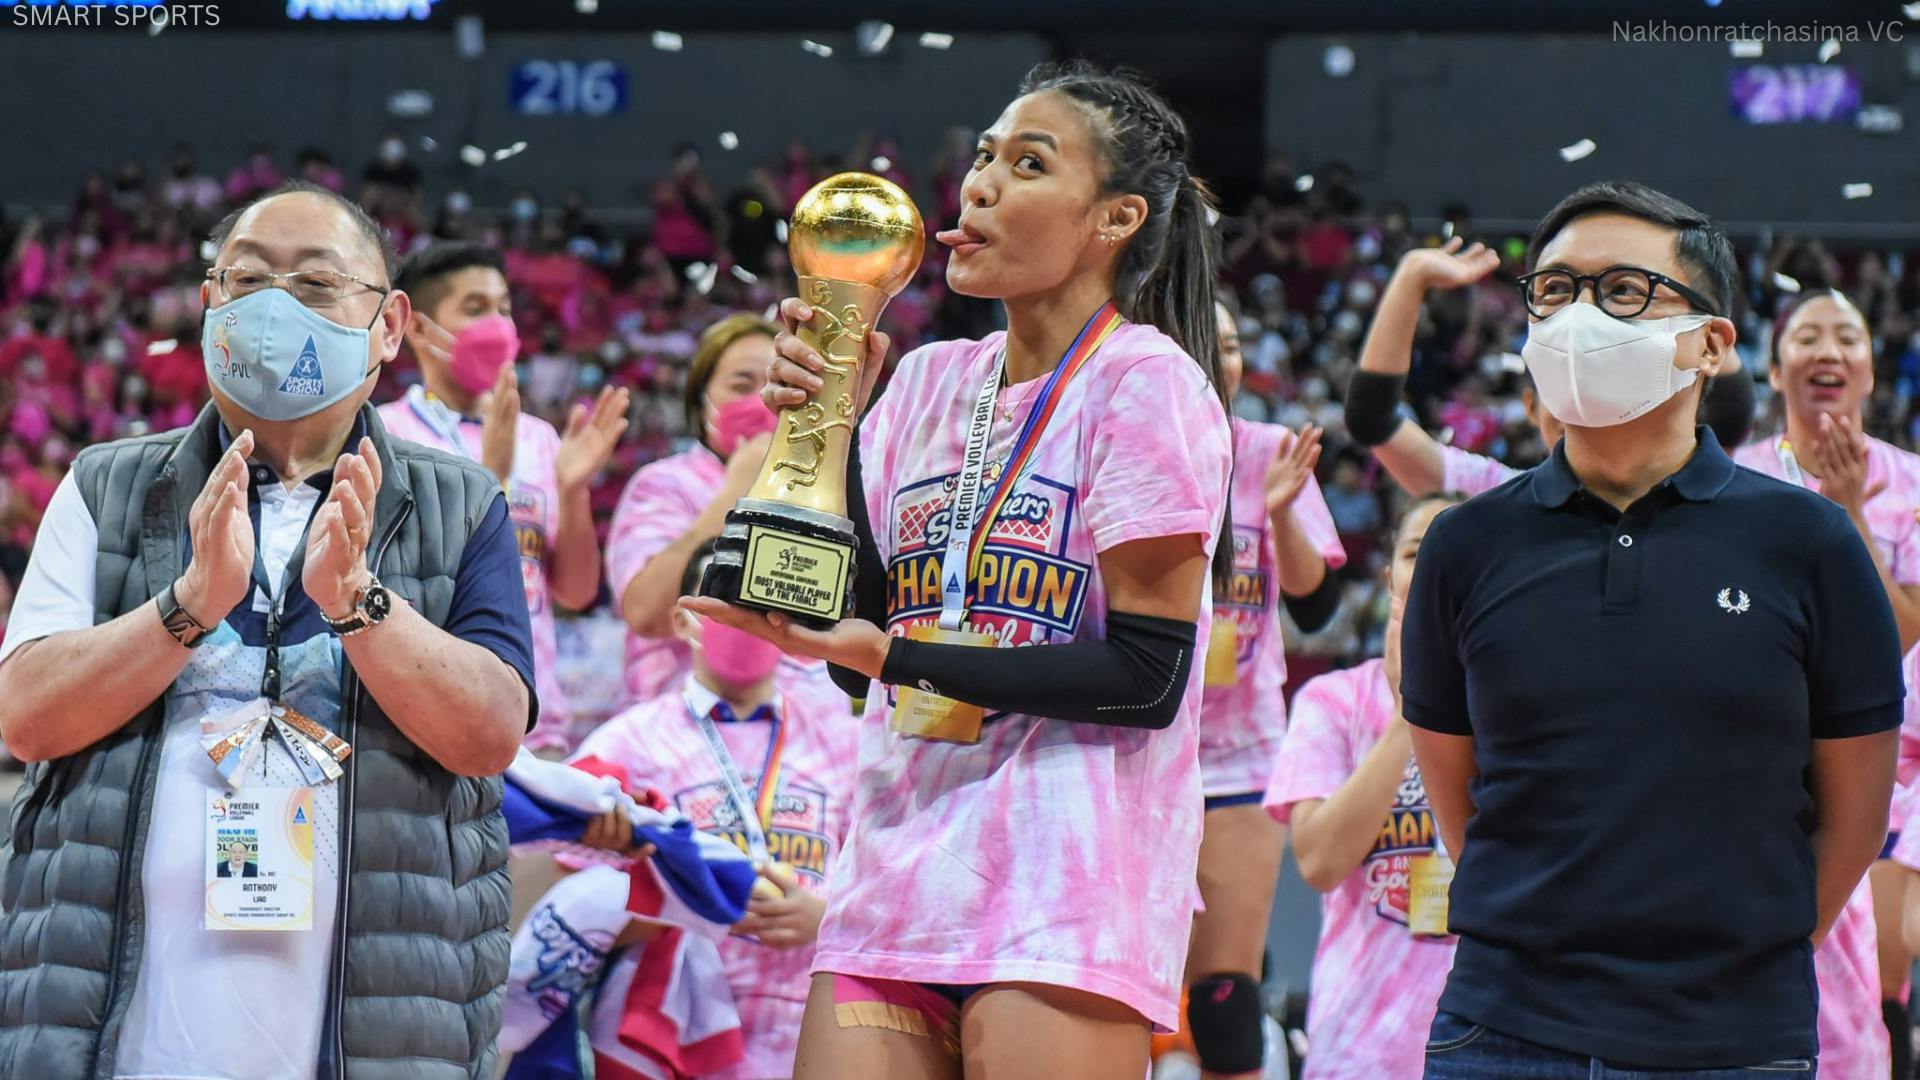 PVL: Domingo commits to Akari after "hard decision" to leave Creamline